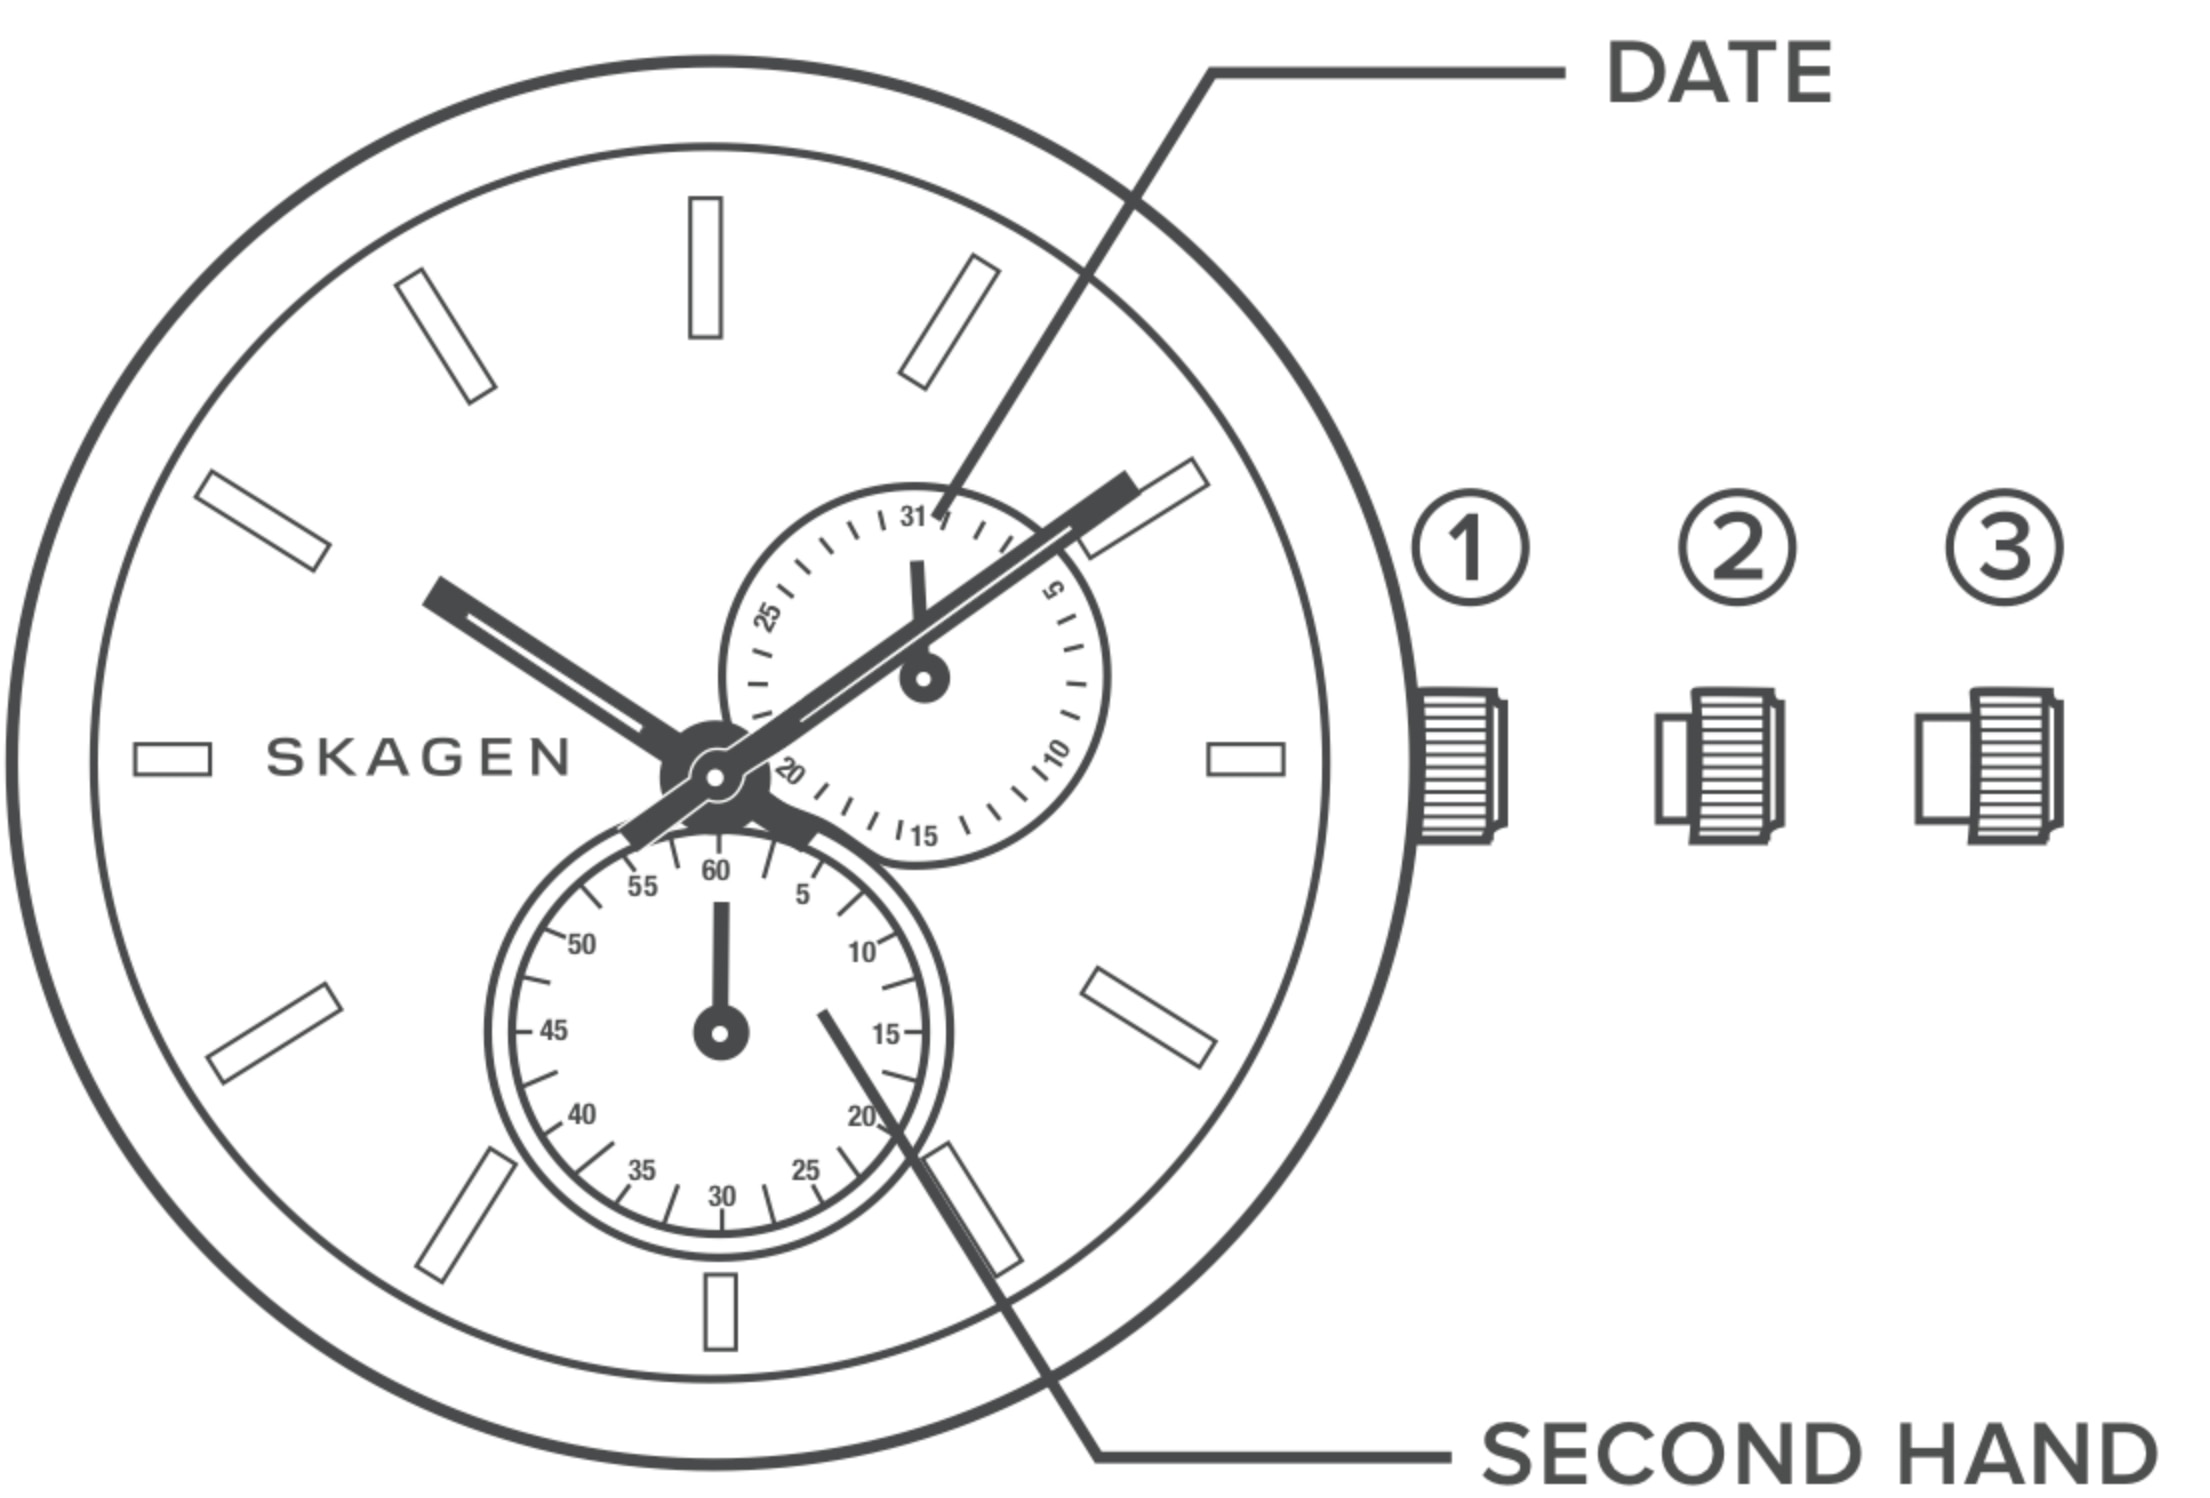 line art of a standard watch dial, identifying the crown, day, and date